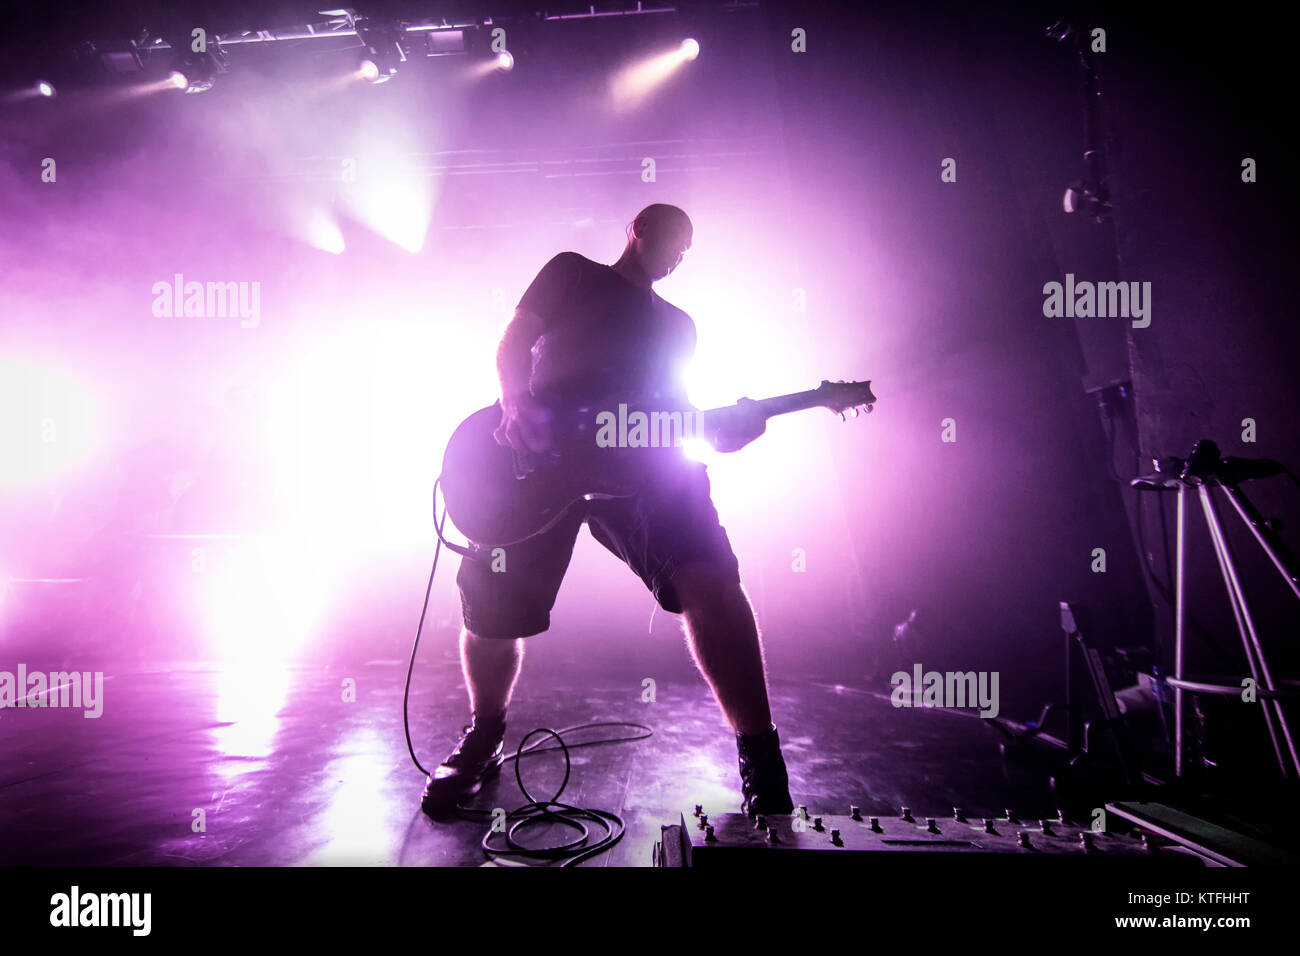 The alternative Norwegian rock band Seigmen (previously known as Klisne Seigmenn) performs a live concert at Sentrum Scene. Here guitarist Sverre Økshoff is seen live on stage. Norway, 30/09 2016. Stock Photo